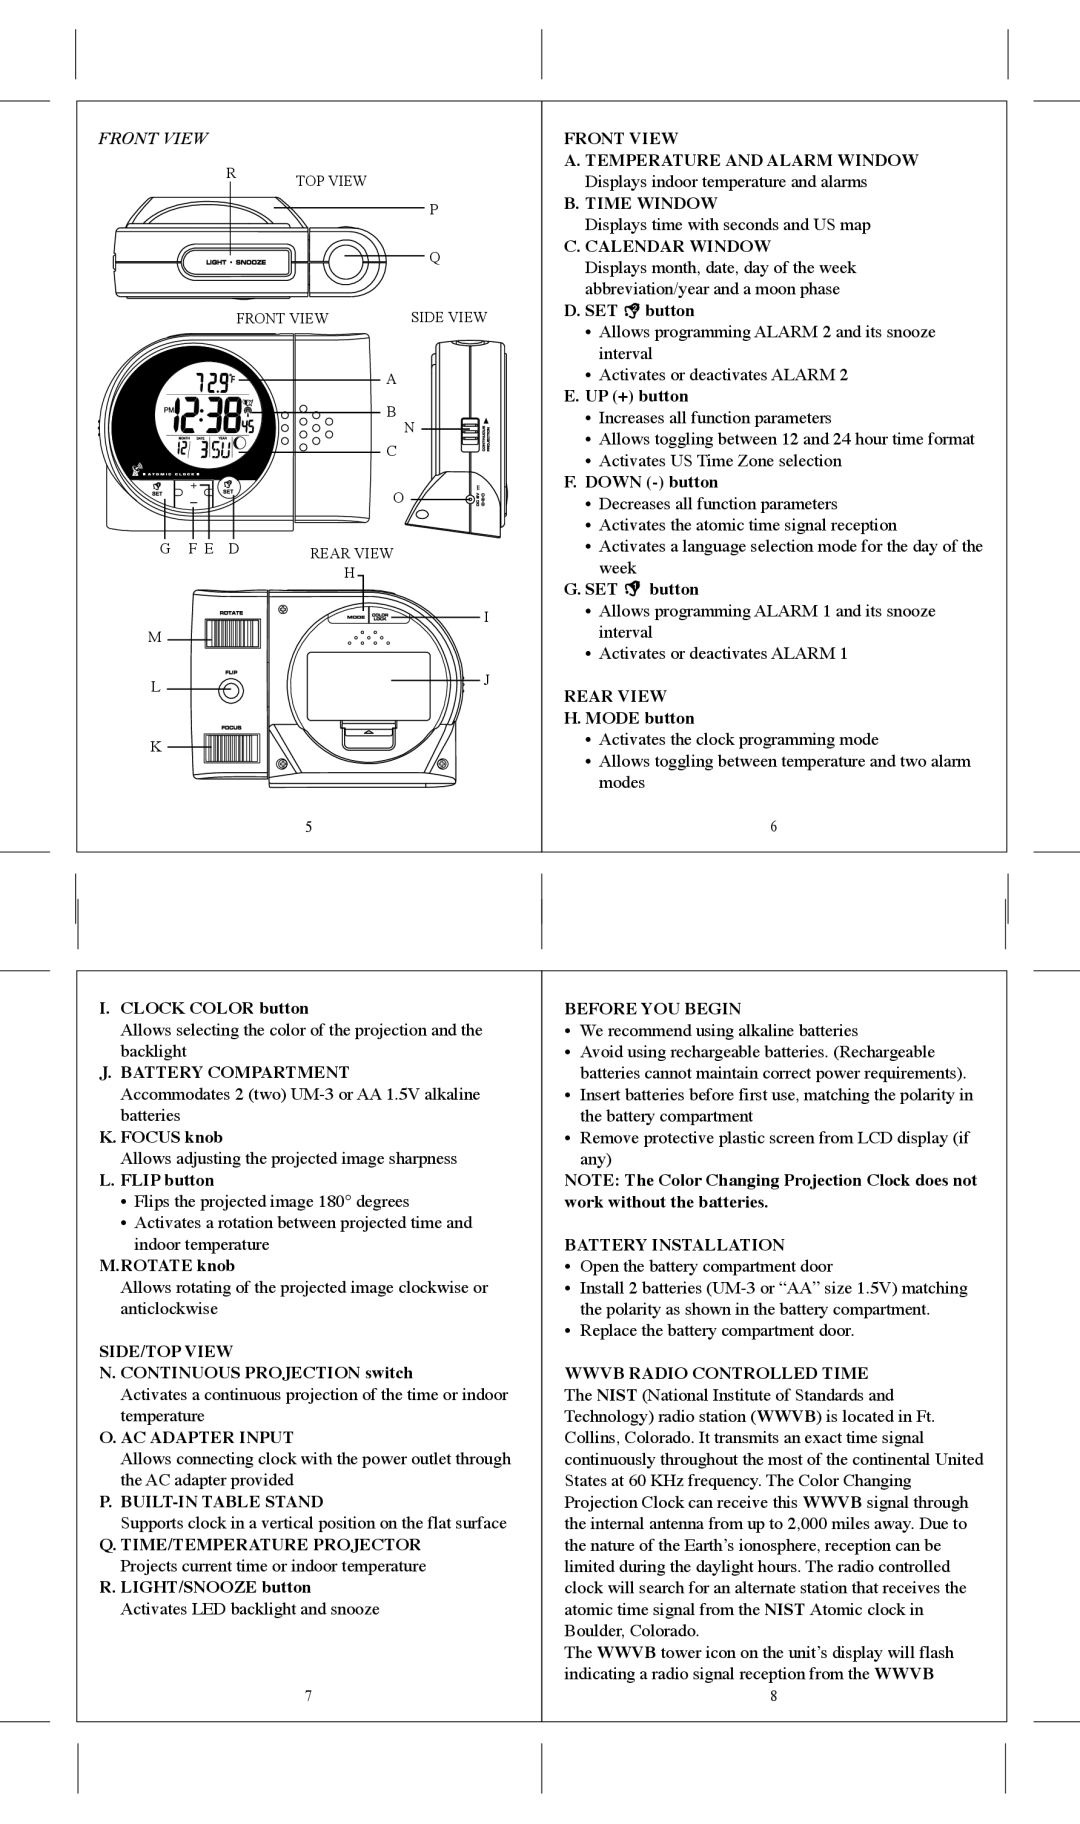 Honeywell PCR19W user manual Front View 